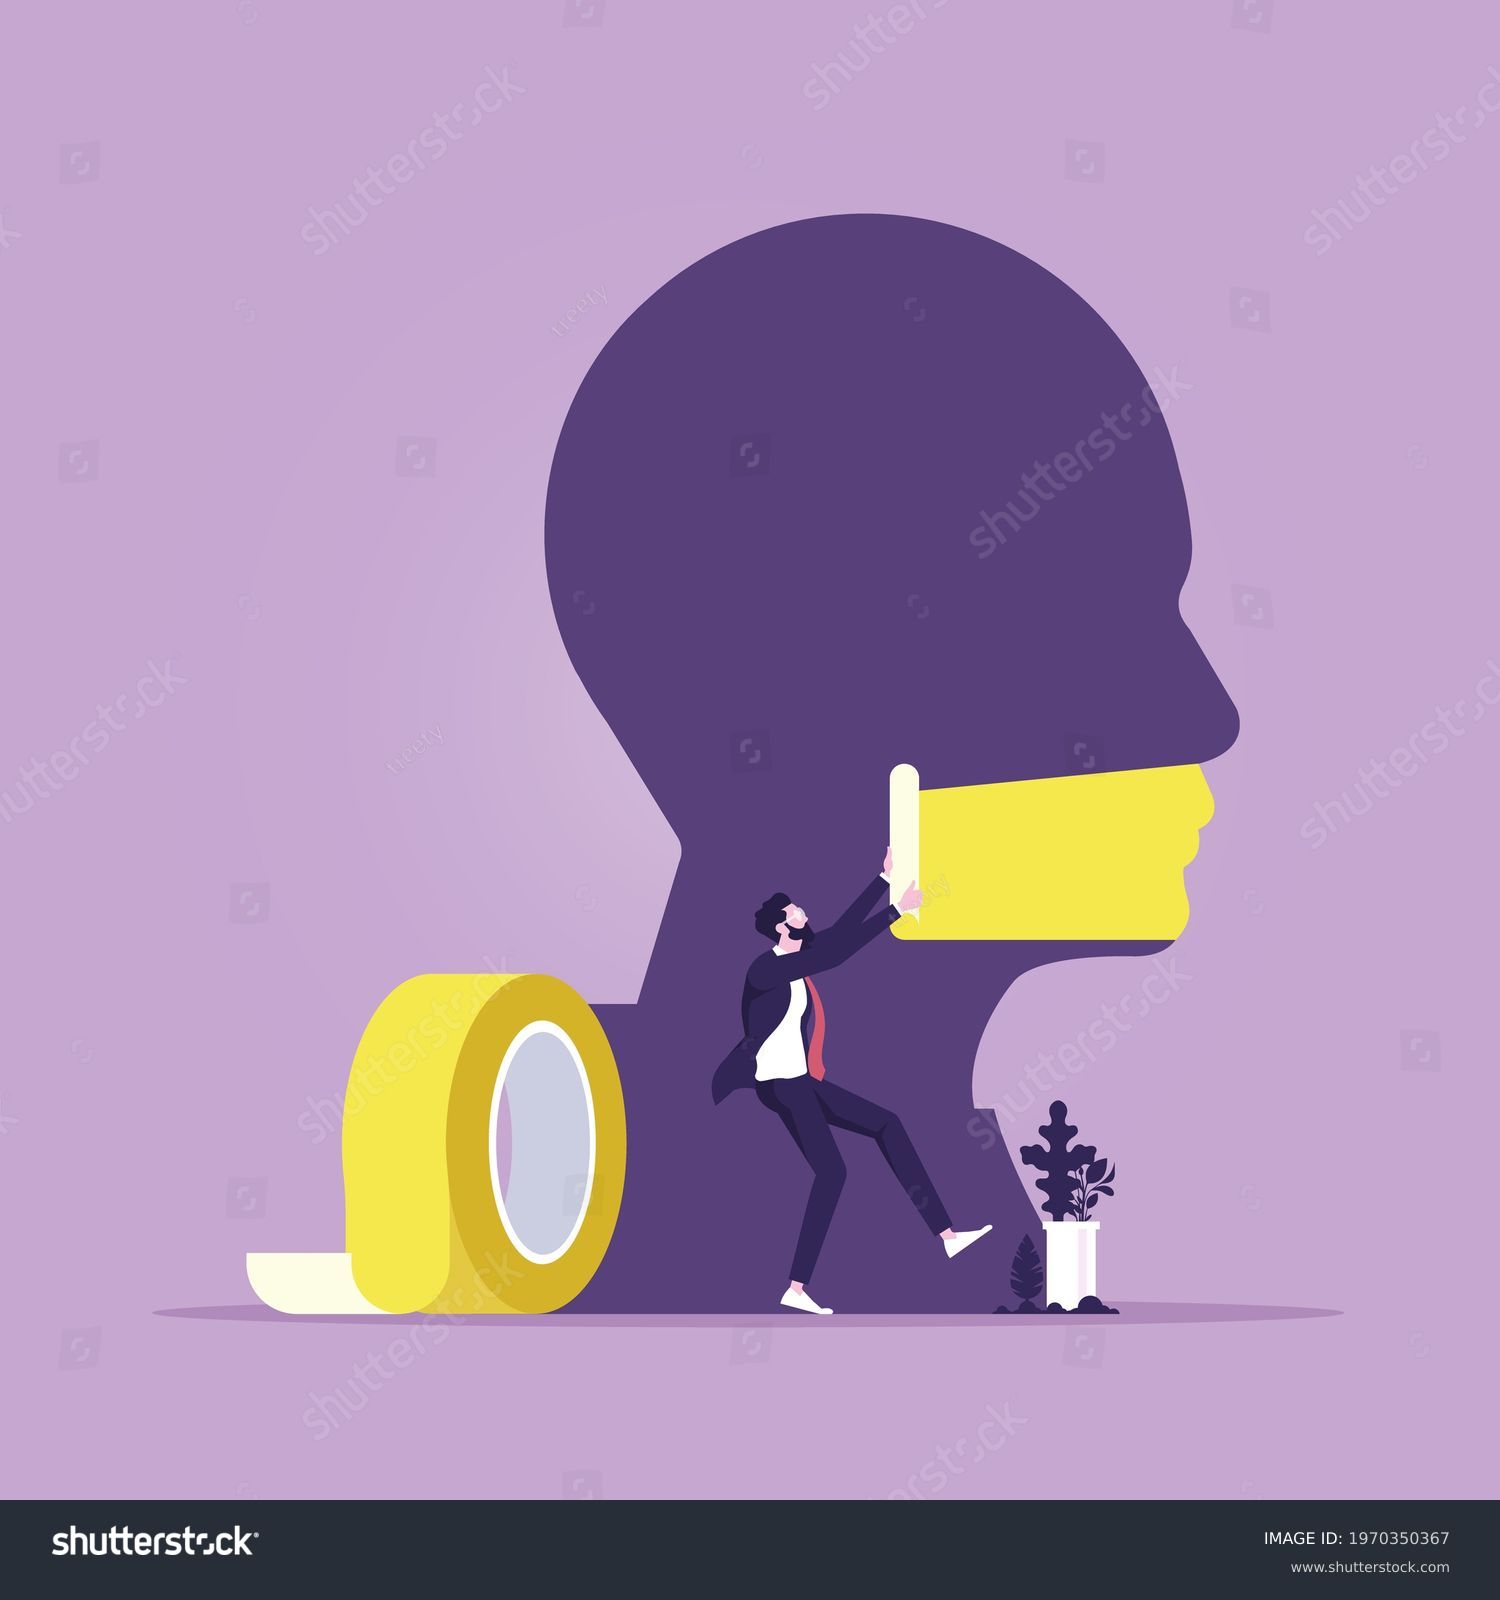 SVG of Businessman use tape to seal the giant's mouth with tape sealed mouth, No comment svg